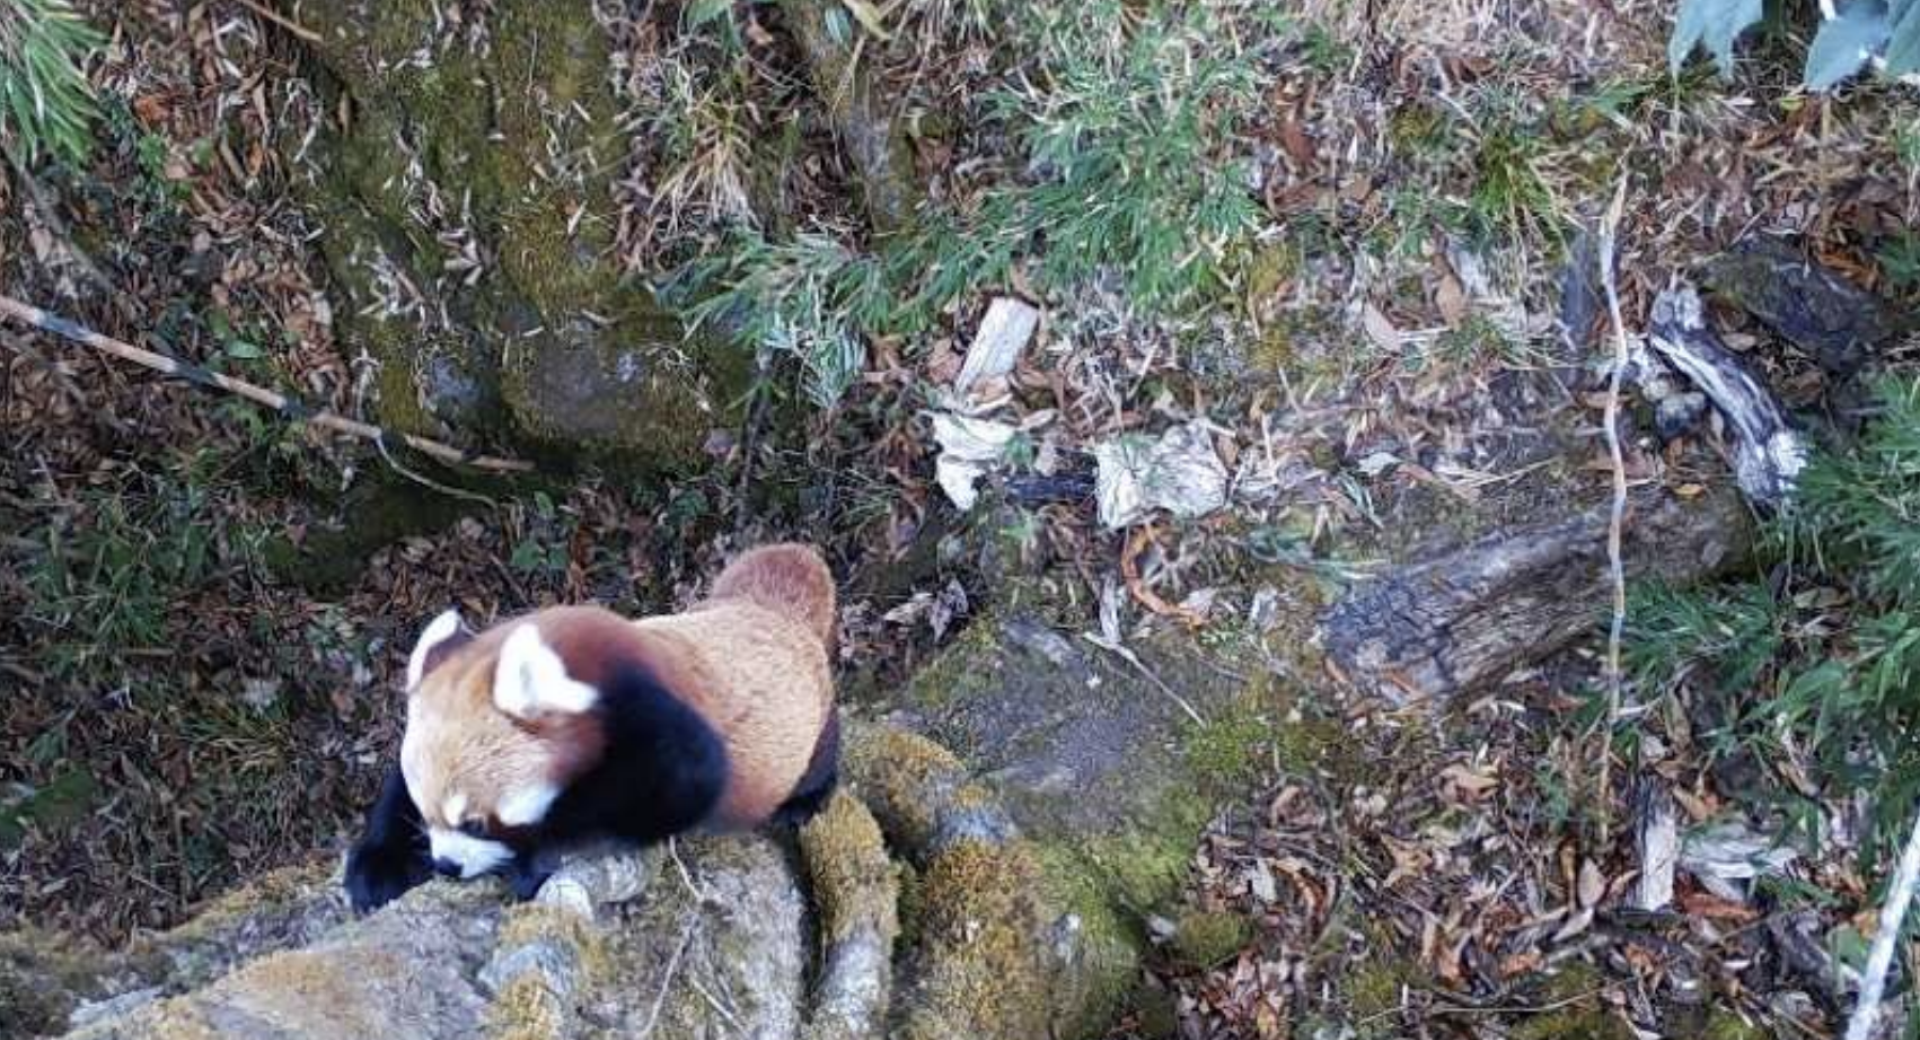 Distribution, and abundance: piloting arboreal camera trapping as a tool for monitoring endangered red panda in temperate forest of Eastern Nepal